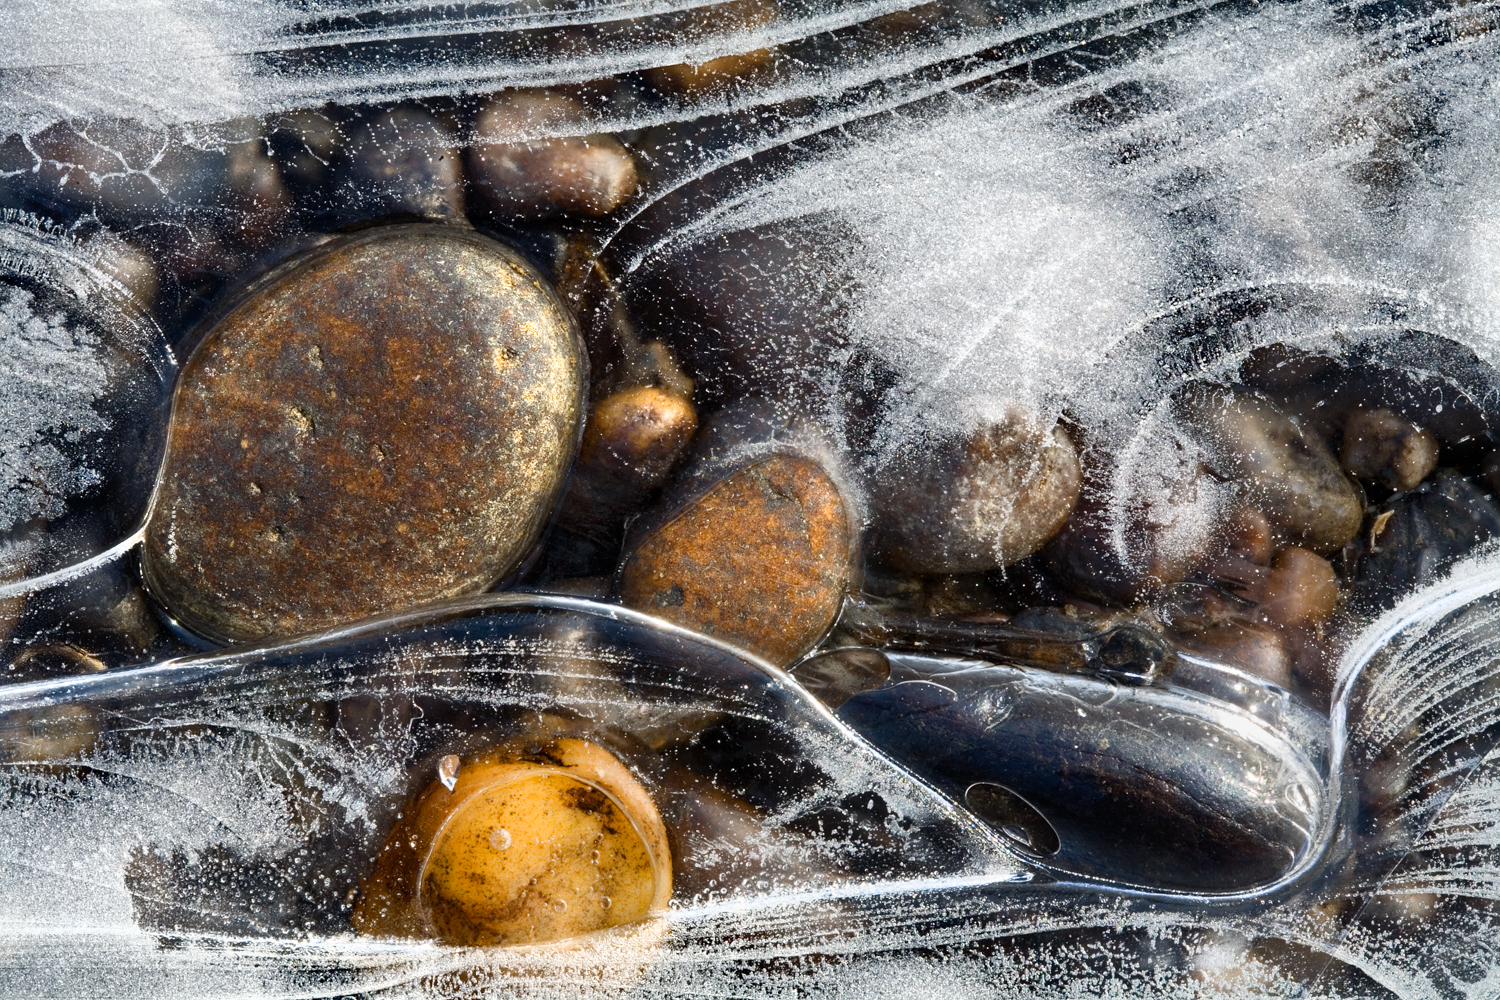 Colorful rocks in Frozen Icy Flow